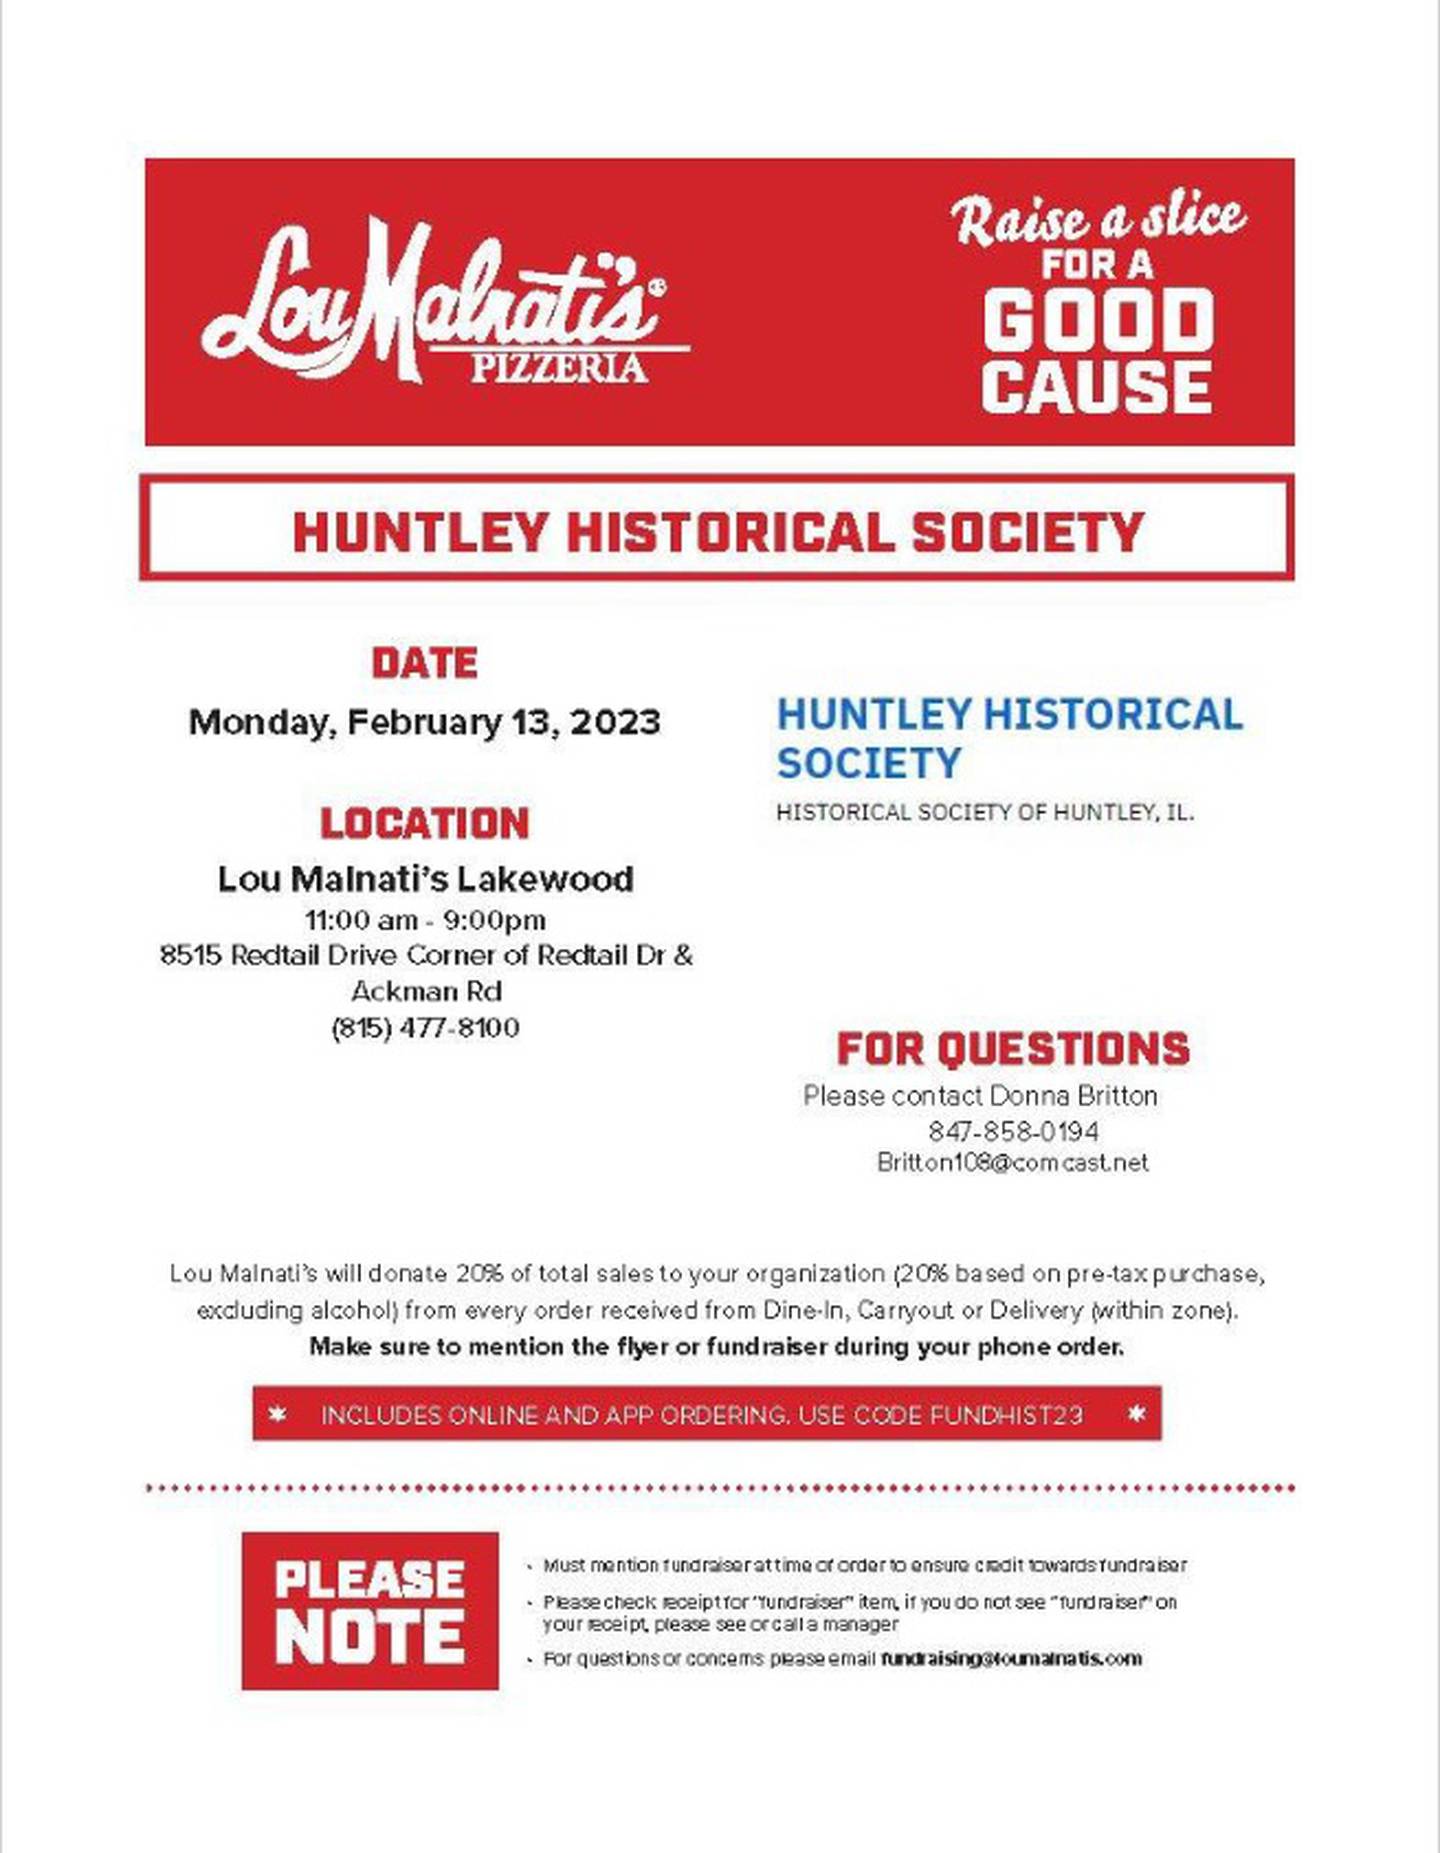 Huntley's Historical Society are asking people to present this flyer when ordering at Lou Malnati's in Lakewood on Feb. 13, 2023, as it will provide donations for the organization to open up a museum.